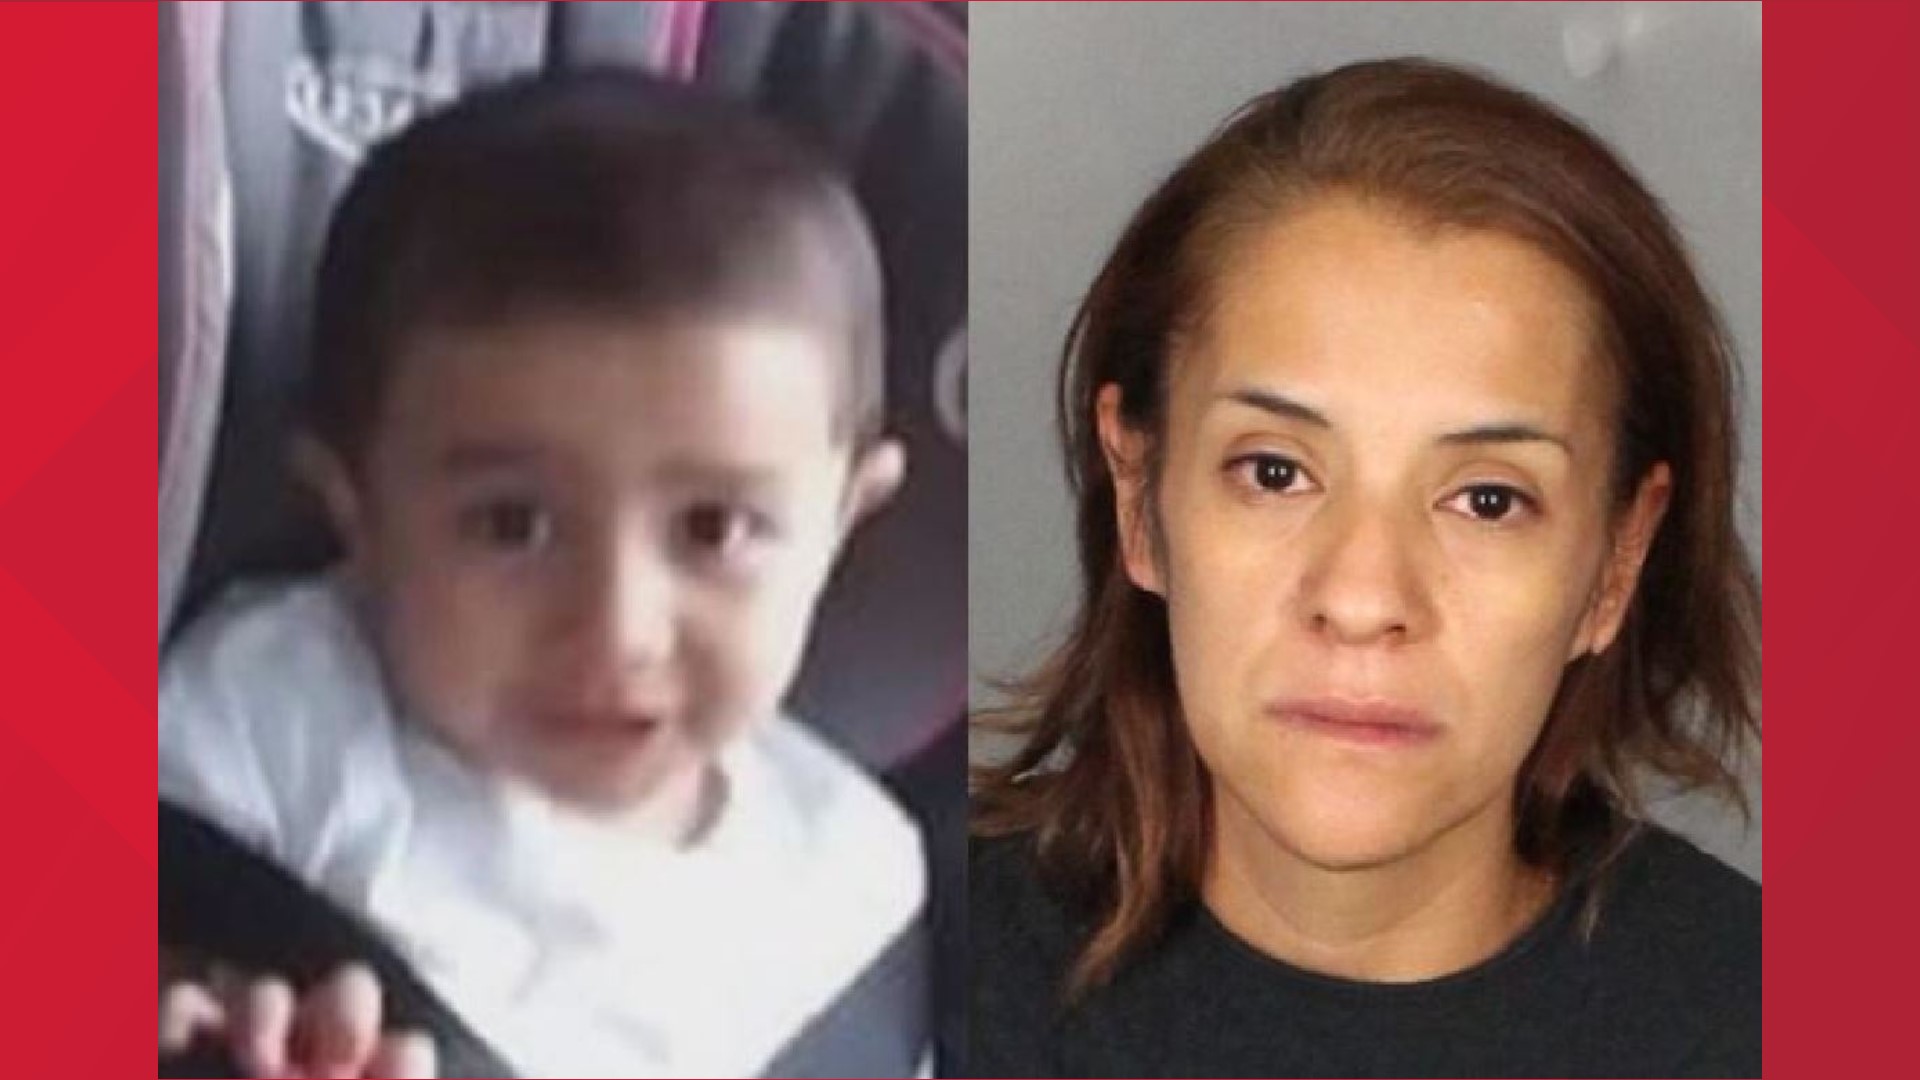 Laura Sanchez, also known as Laura Villalon, was indicted after her 2-year-old son, Frankie Gonzales, died in her care in May.